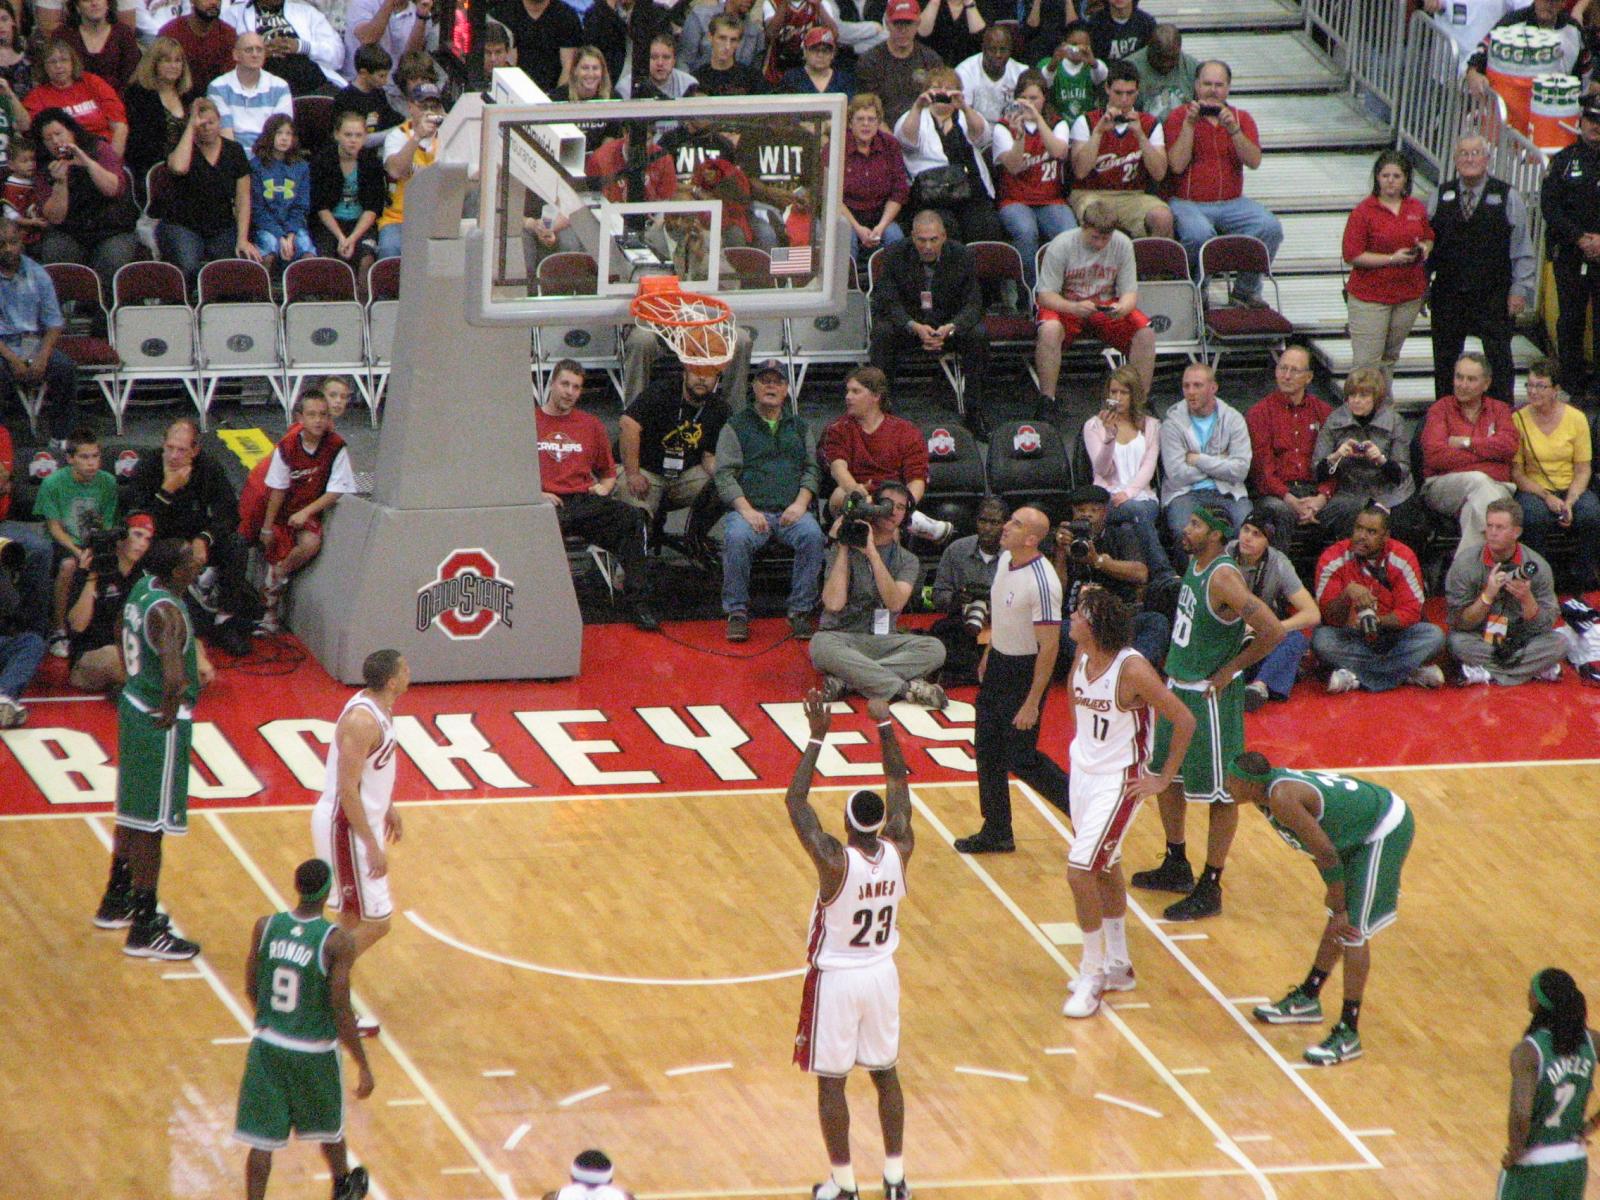 a bunch of people in the court playing a basketball game